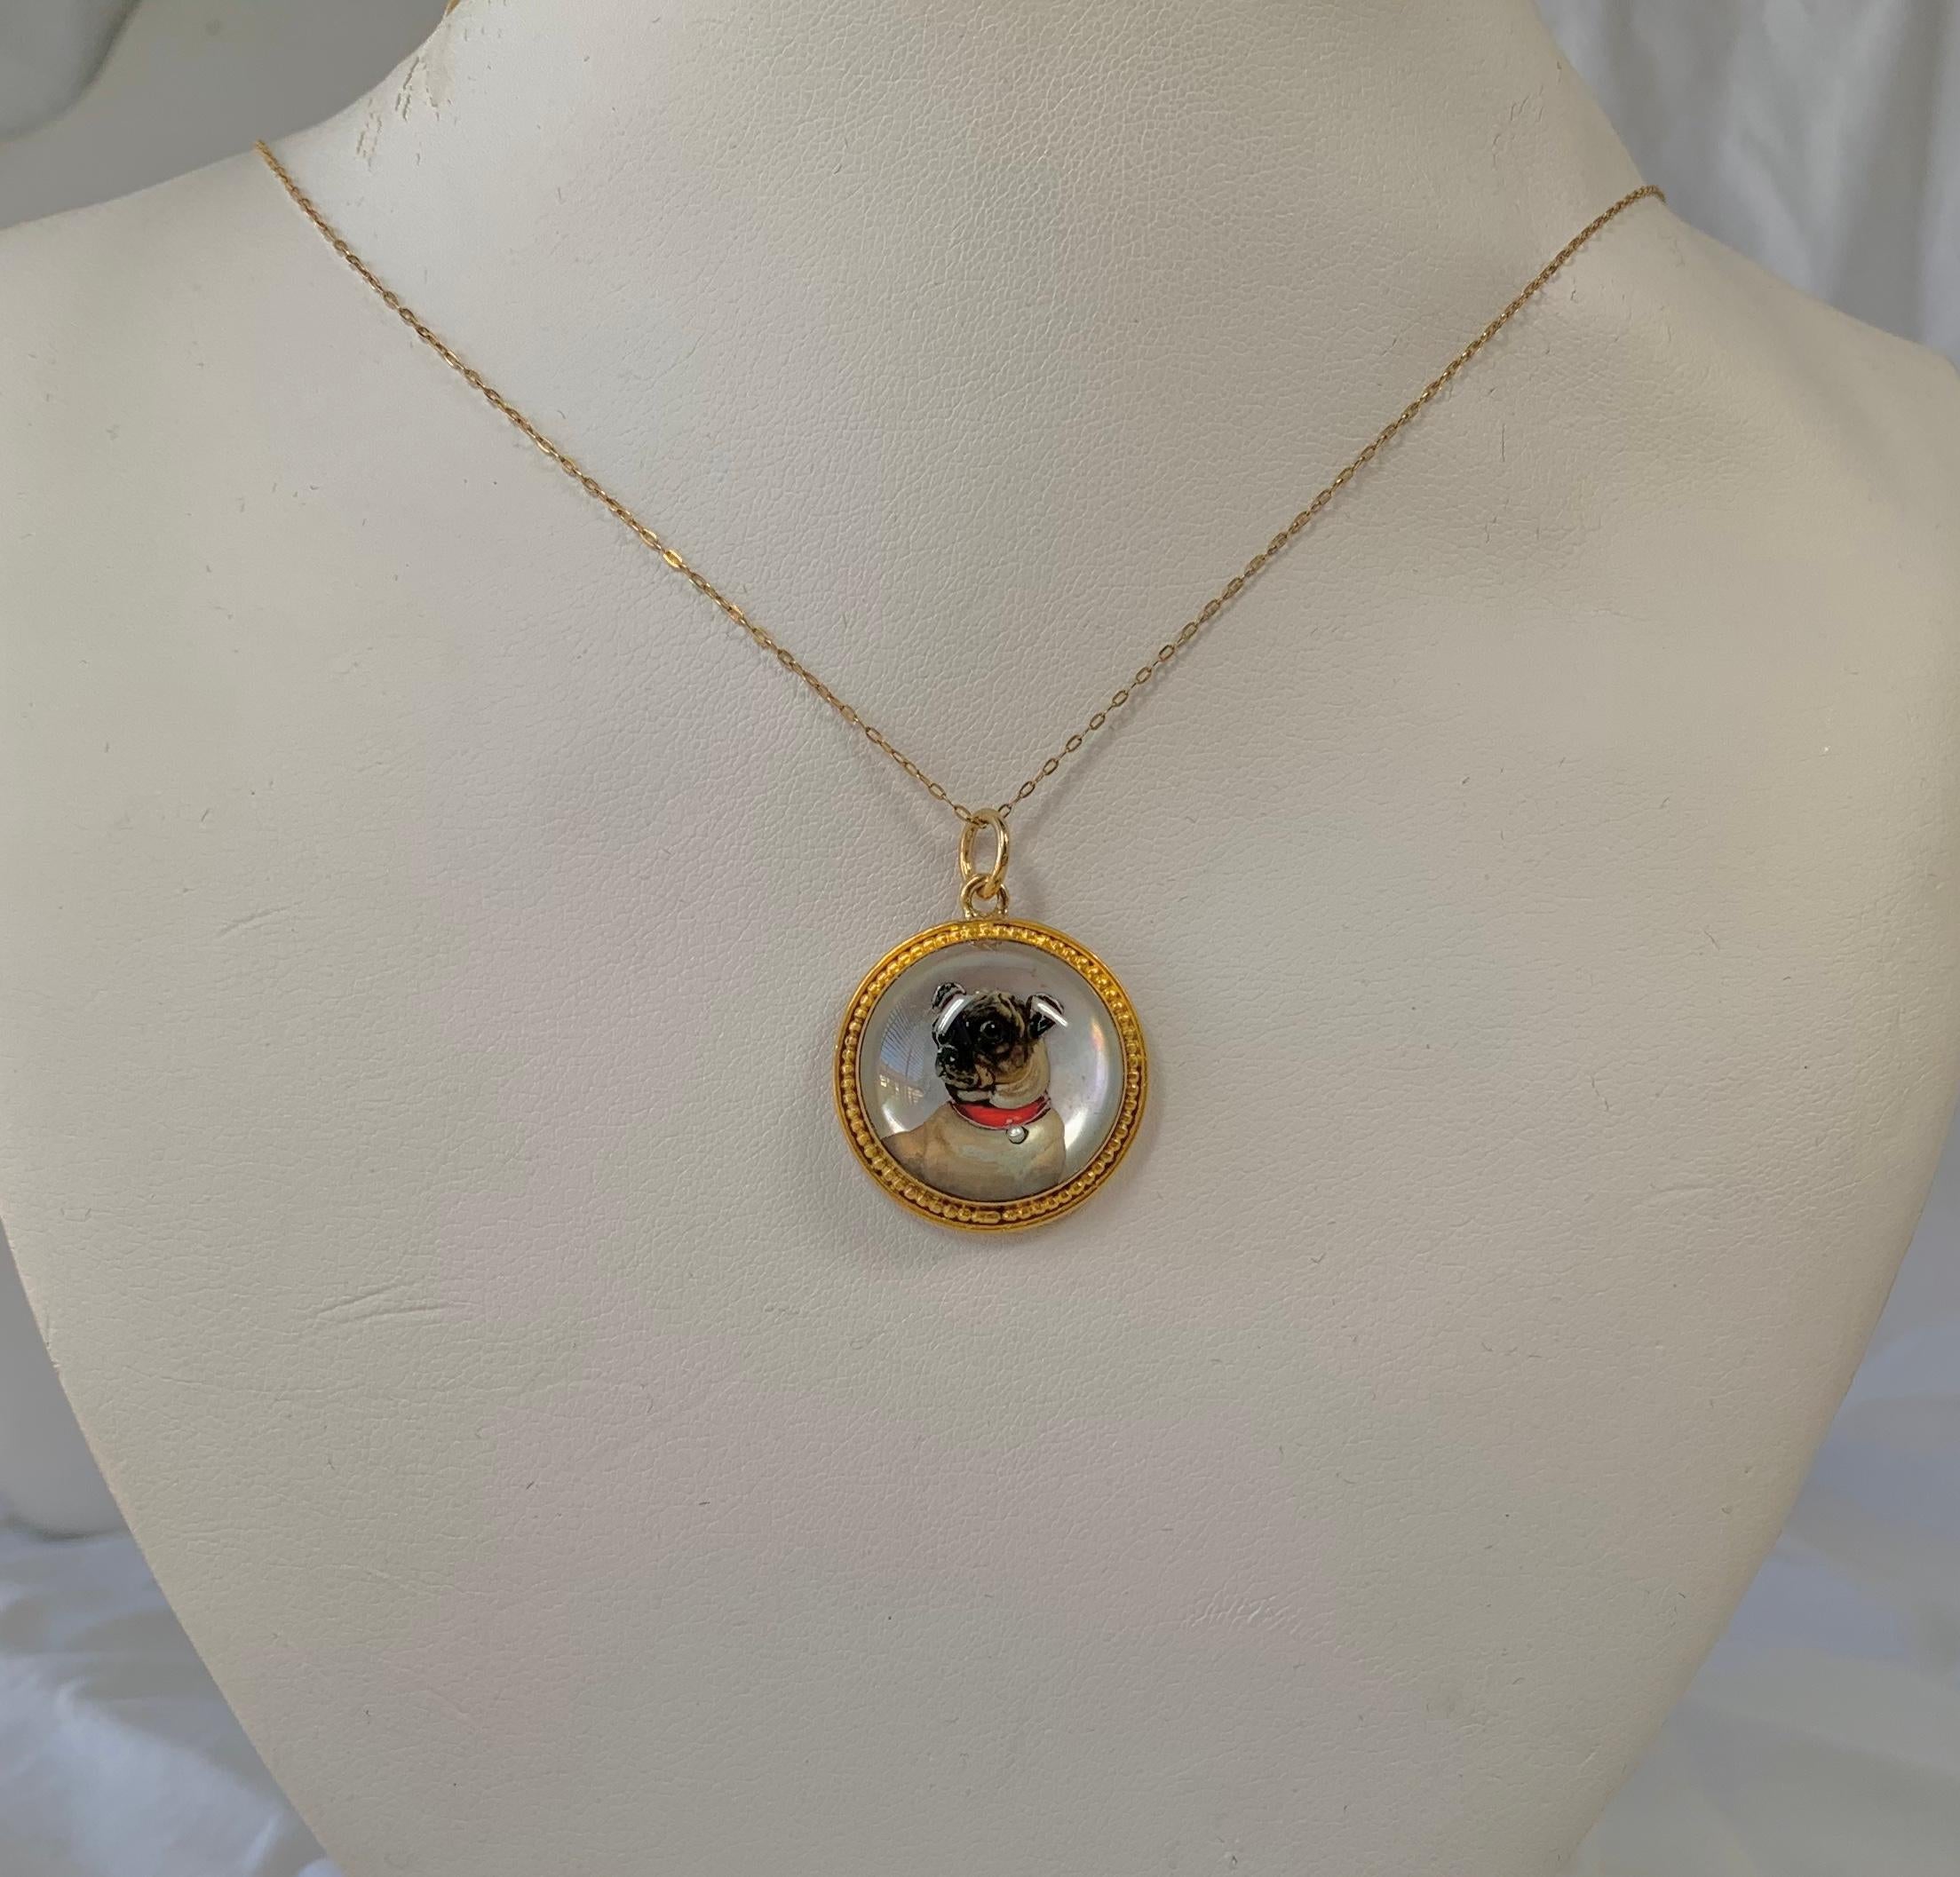 This is a gorgeous and very rare antique Victorian Essex Crystal, also referred to as a reverse crystal intaglio, Pendant with an exquisitely rendered carved and enamel image of a Pug Dog in 18 Karat Gold.  The Essex Crystal pendant is in superb